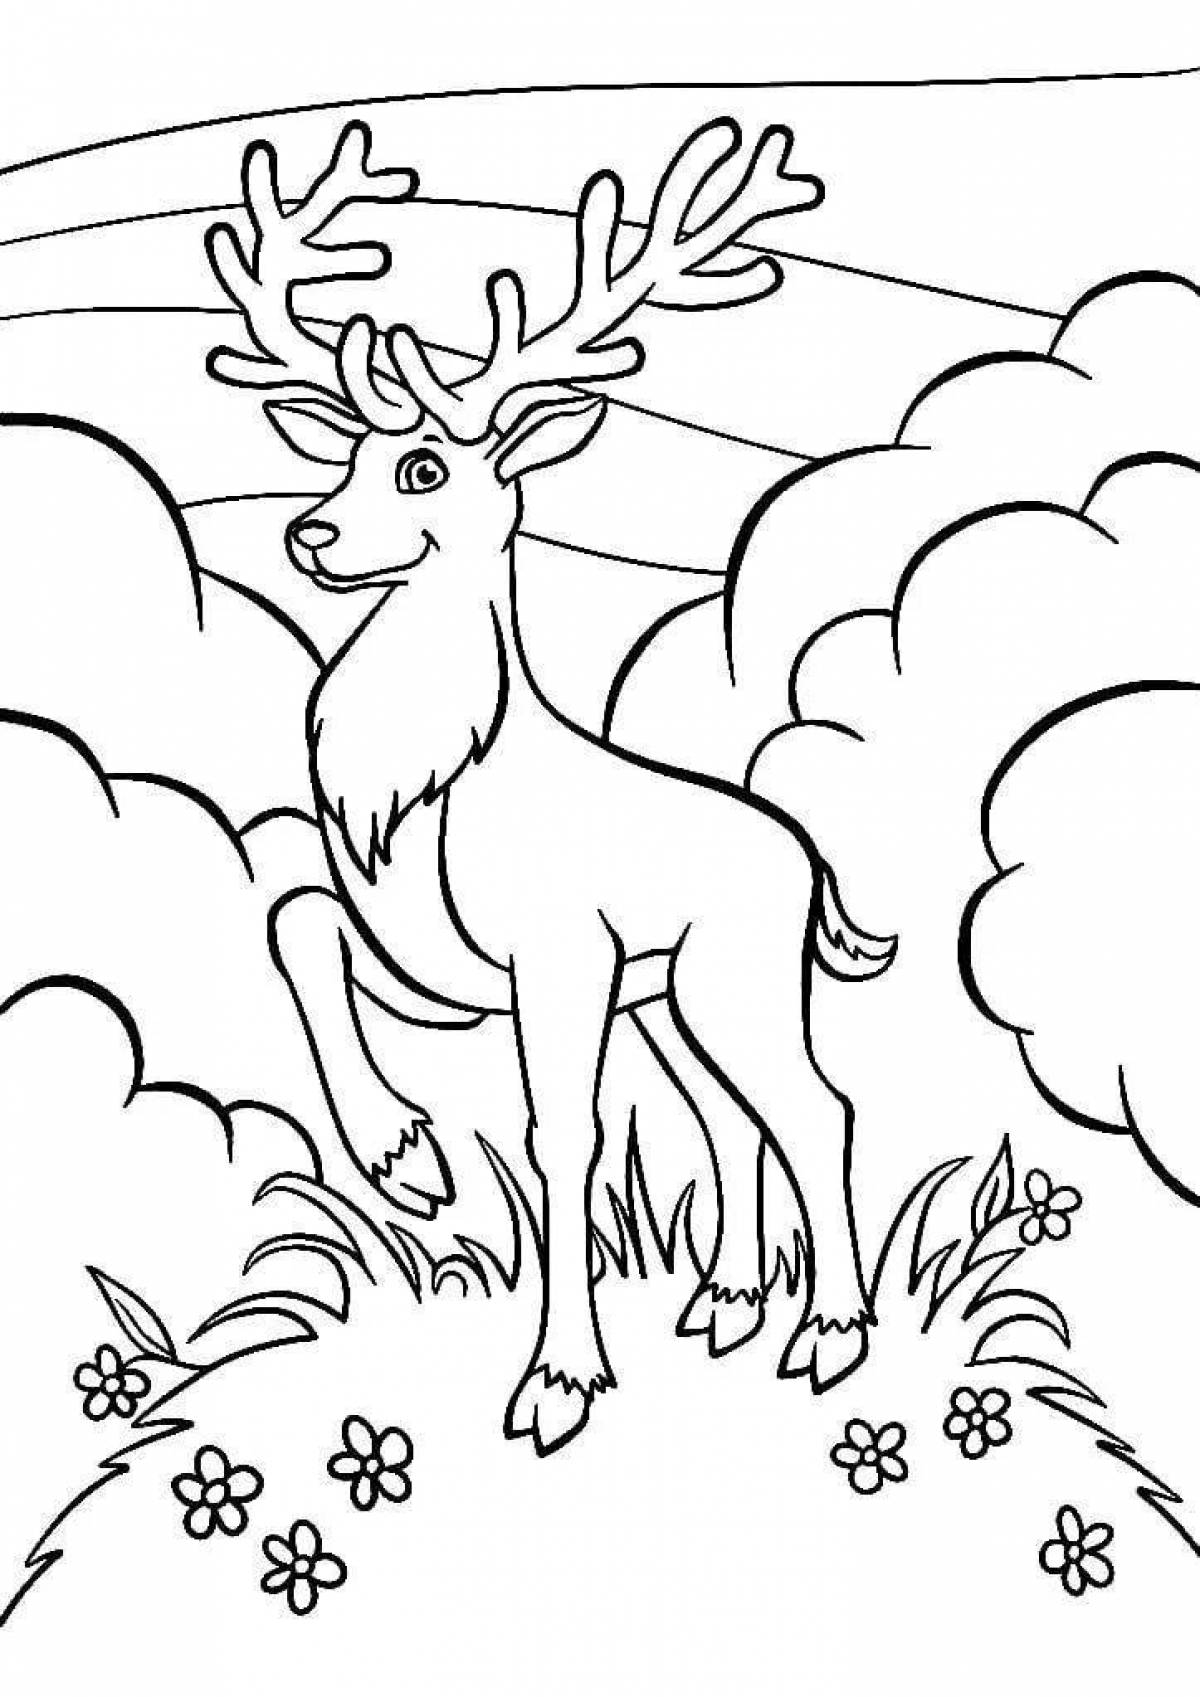 Silver hoof coloring page playful for toddlers